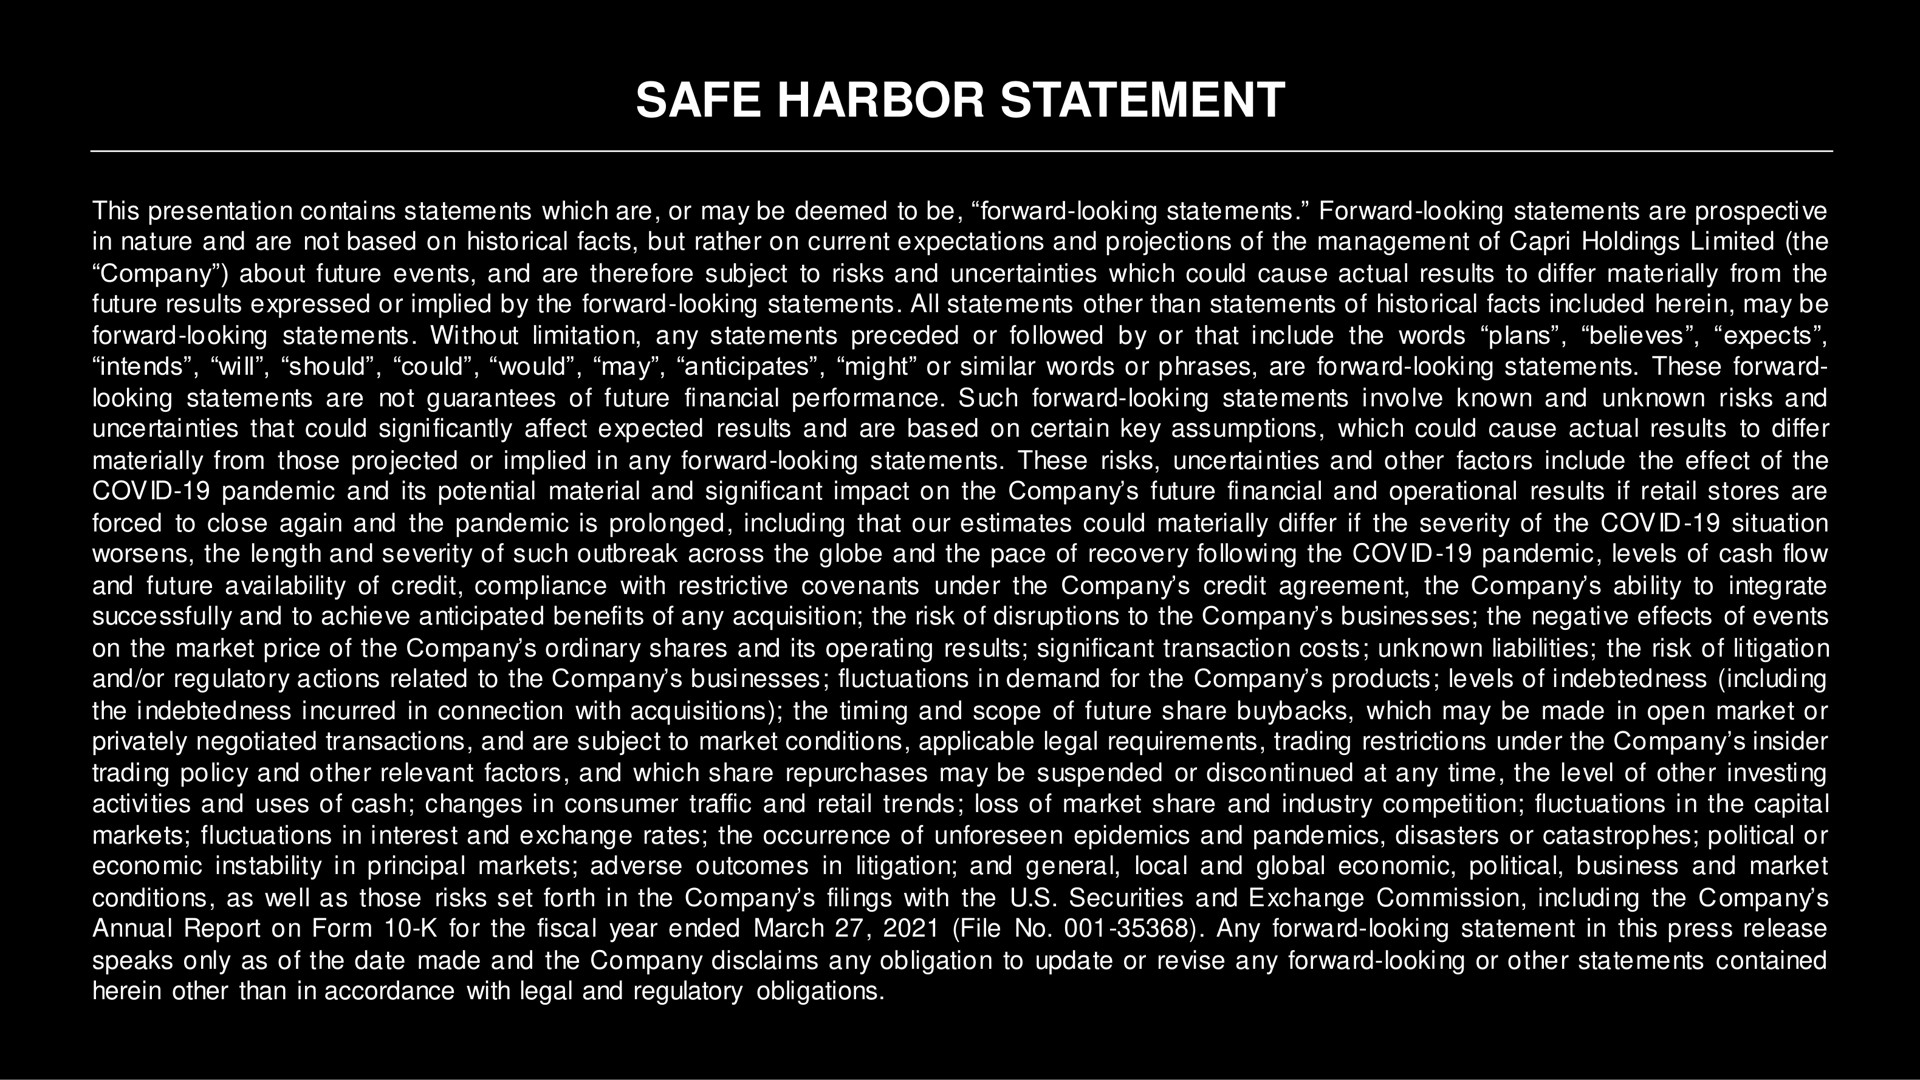 safe harbor statement this presentation contains statements which are or may be deemed to be forward looking statements forward looking statements are prospective in nature and are not based on historical facts but rather on current expectations and projections of the management of holdings limited the company about future events and are therefore subject to risks and uncertainties which could cause actual results to differ materially from the future results expressed or implied by the forward looking statements all statements other than statements of historical facts included herein may be forward looking statements without limitation any statements preceded or followed by or that include the words plans believes expects intends will should could would may anticipates might or similar words or phrases are forward looking statements these forward looking statements are not guarantees of future financial performance such forward looking statements involve known and unknown risks and uncertainties that could significantly affect expected results and are based on certain key assumptions which could cause actual results to differ materially from those projected or implied in any forward looking statements these risks uncertainties and other factors include the effect of the covid pandemic and its potential material and significant impact on the company future financial and operational results if retail stores are forced to close again and the pandemic is prolonged including that our estimates could materially differ if the severity of the covid situation worsens the length and severity of such outbreak across the globe and the pace of recovery following the covid pandemic levels of cash flow and future availability of credit compliance with restrictive covenants under the company credit agreement the company ability to integrate successfully and to achieve anticipated benefits of any acquisition the risk of disruptions to the company businesses the negative effects of events on the market price of the company ordinary shares and its operating results significant transaction costs unknown liabilities the risk of litigation and or regulatory actions related to the company businesses fluctuations in demand for the company products levels of indebtedness including the indebtedness incurred in connection with acquisitions the timing and scope of future share which may be made in open market or privately negotiated transactions and are subject to market conditions applicable legal requirements trading restrictions under the company insider trading policy and other relevant factors and which share repurchases may be suspended or discontinued at any time the level of other investing activities and uses of cash changes in consumer traffic and retail trends loss of market share and industry competition fluctuations in the capital markets fluctuations in interest and exchange rates the occurrence of unforeseen epidemics and pandemics disasters or catastrophes political or economic instability in principal markets adverse outcomes in litigation and general local and global economic political business and market conditions as well as those risks set forth in the company filings with the securities and exchange commission including the company annual report on form for the fiscal year ended march file no any forward looking statement in this press release speaks only as of the date made and the company disclaims any obligation to update or revise any forward looking or other statements contained herein other than in accordance with legal and regulatory obligations | Capri Holdings